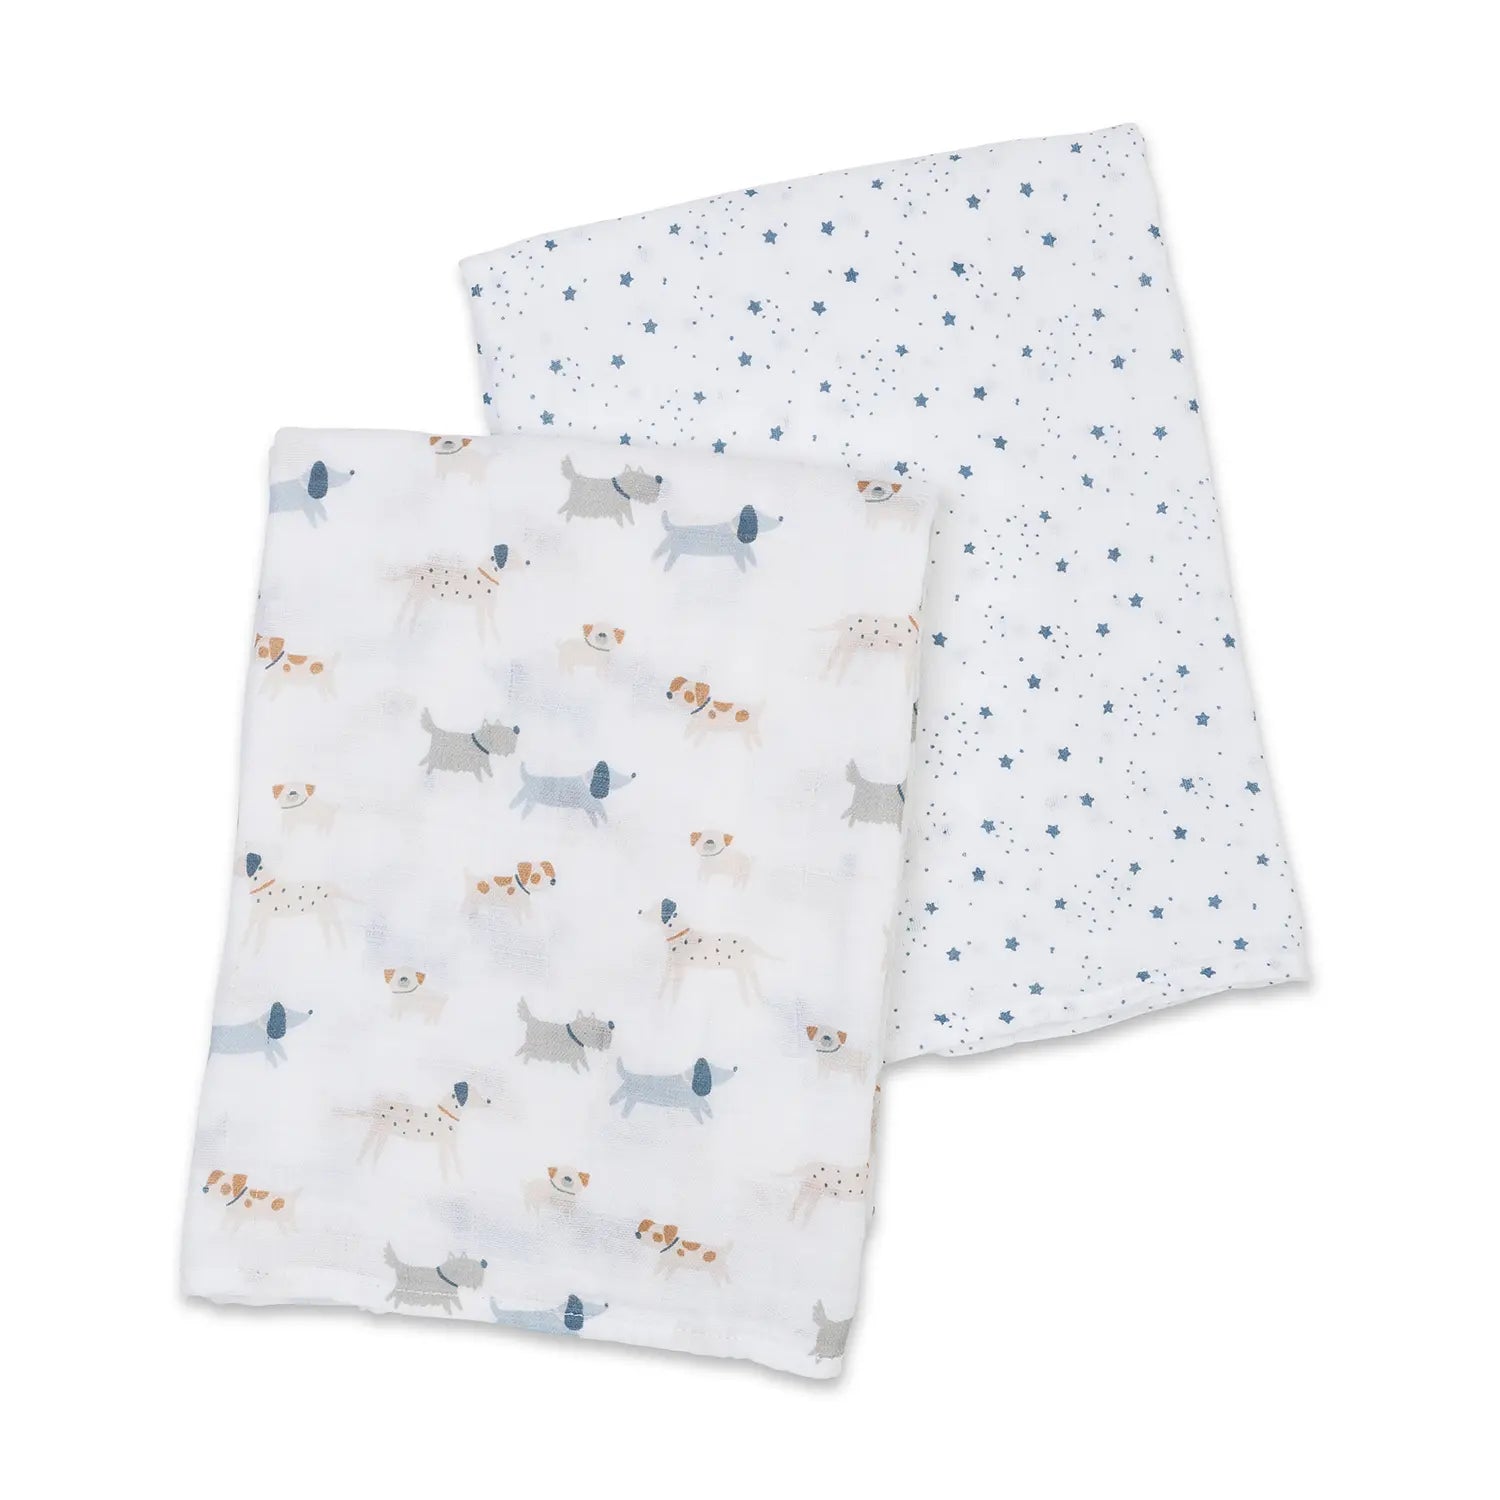 2 pack Cotton Swaddles - Puppy Dog + Stars